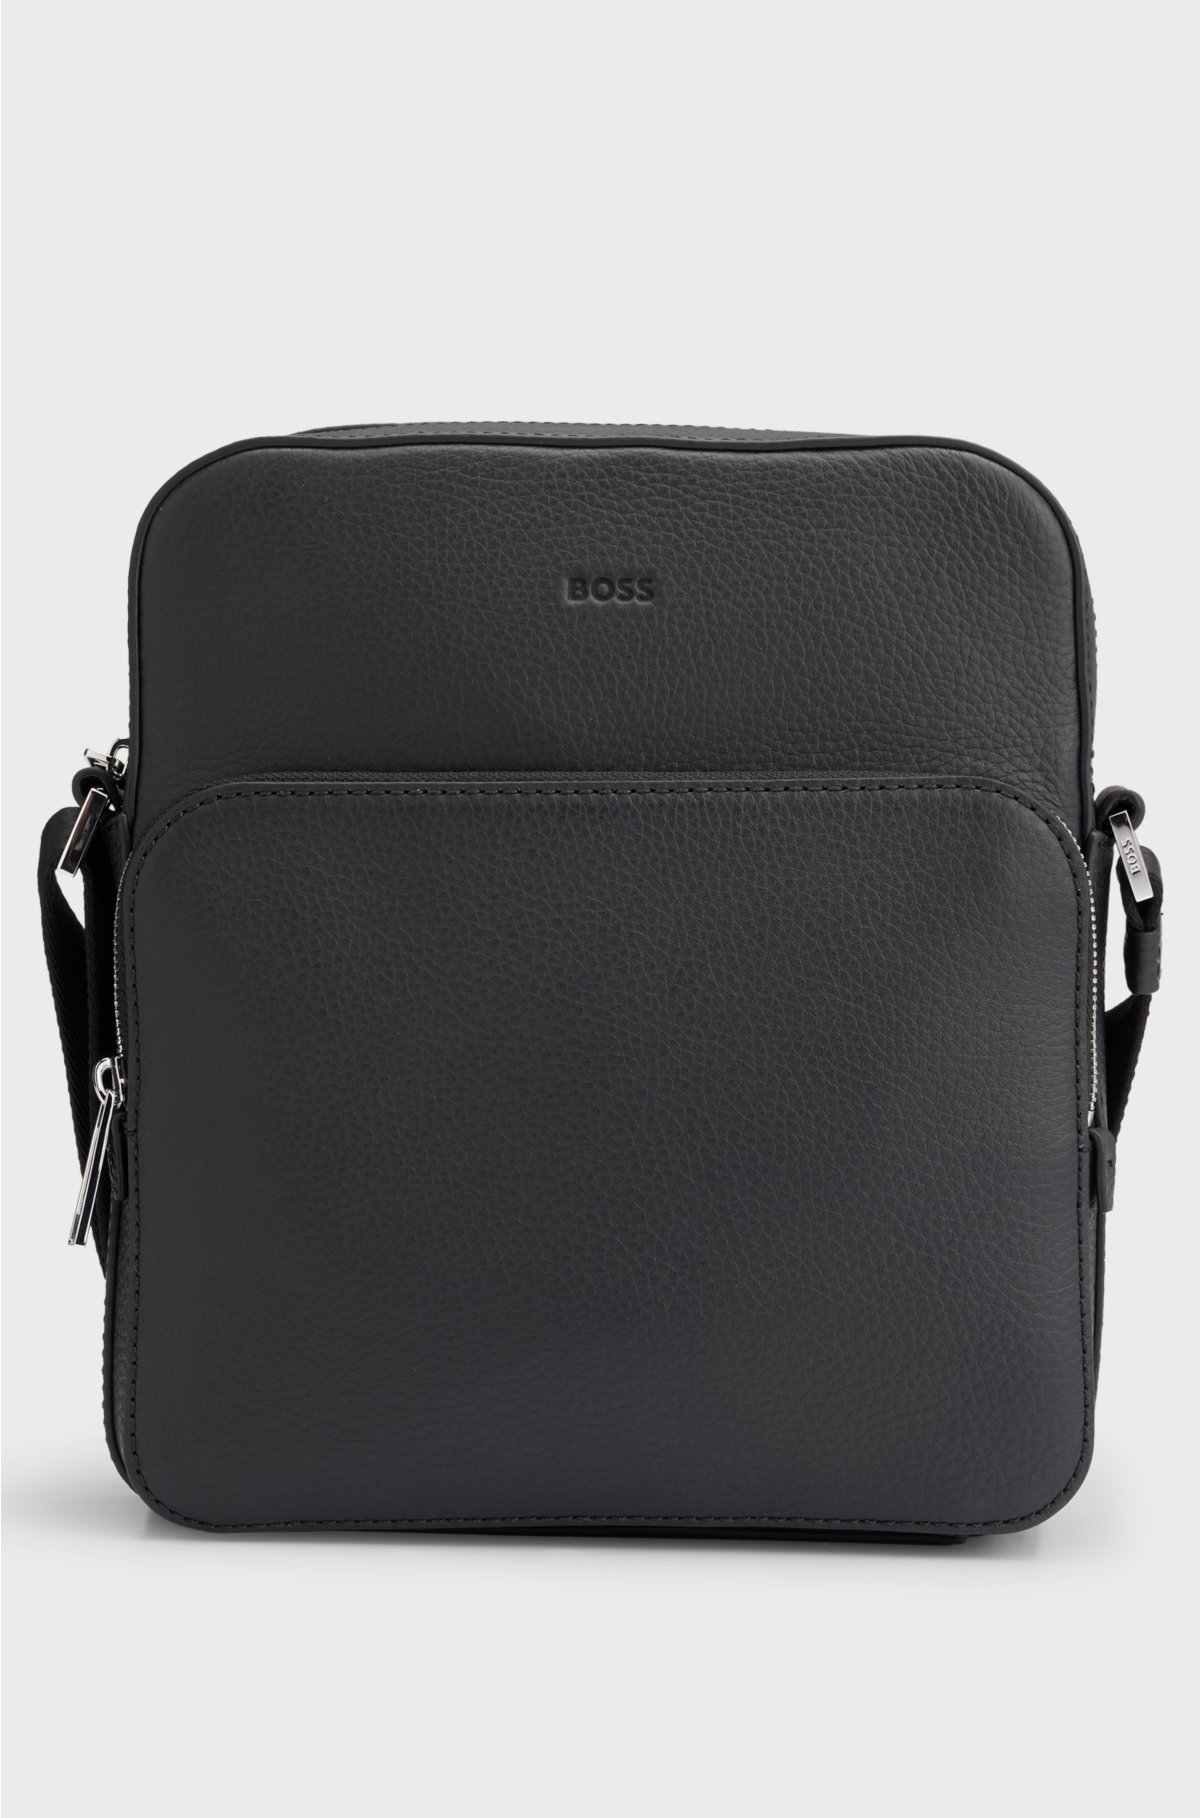 Reporter bag in grained Italian leather with embossed logo, Black